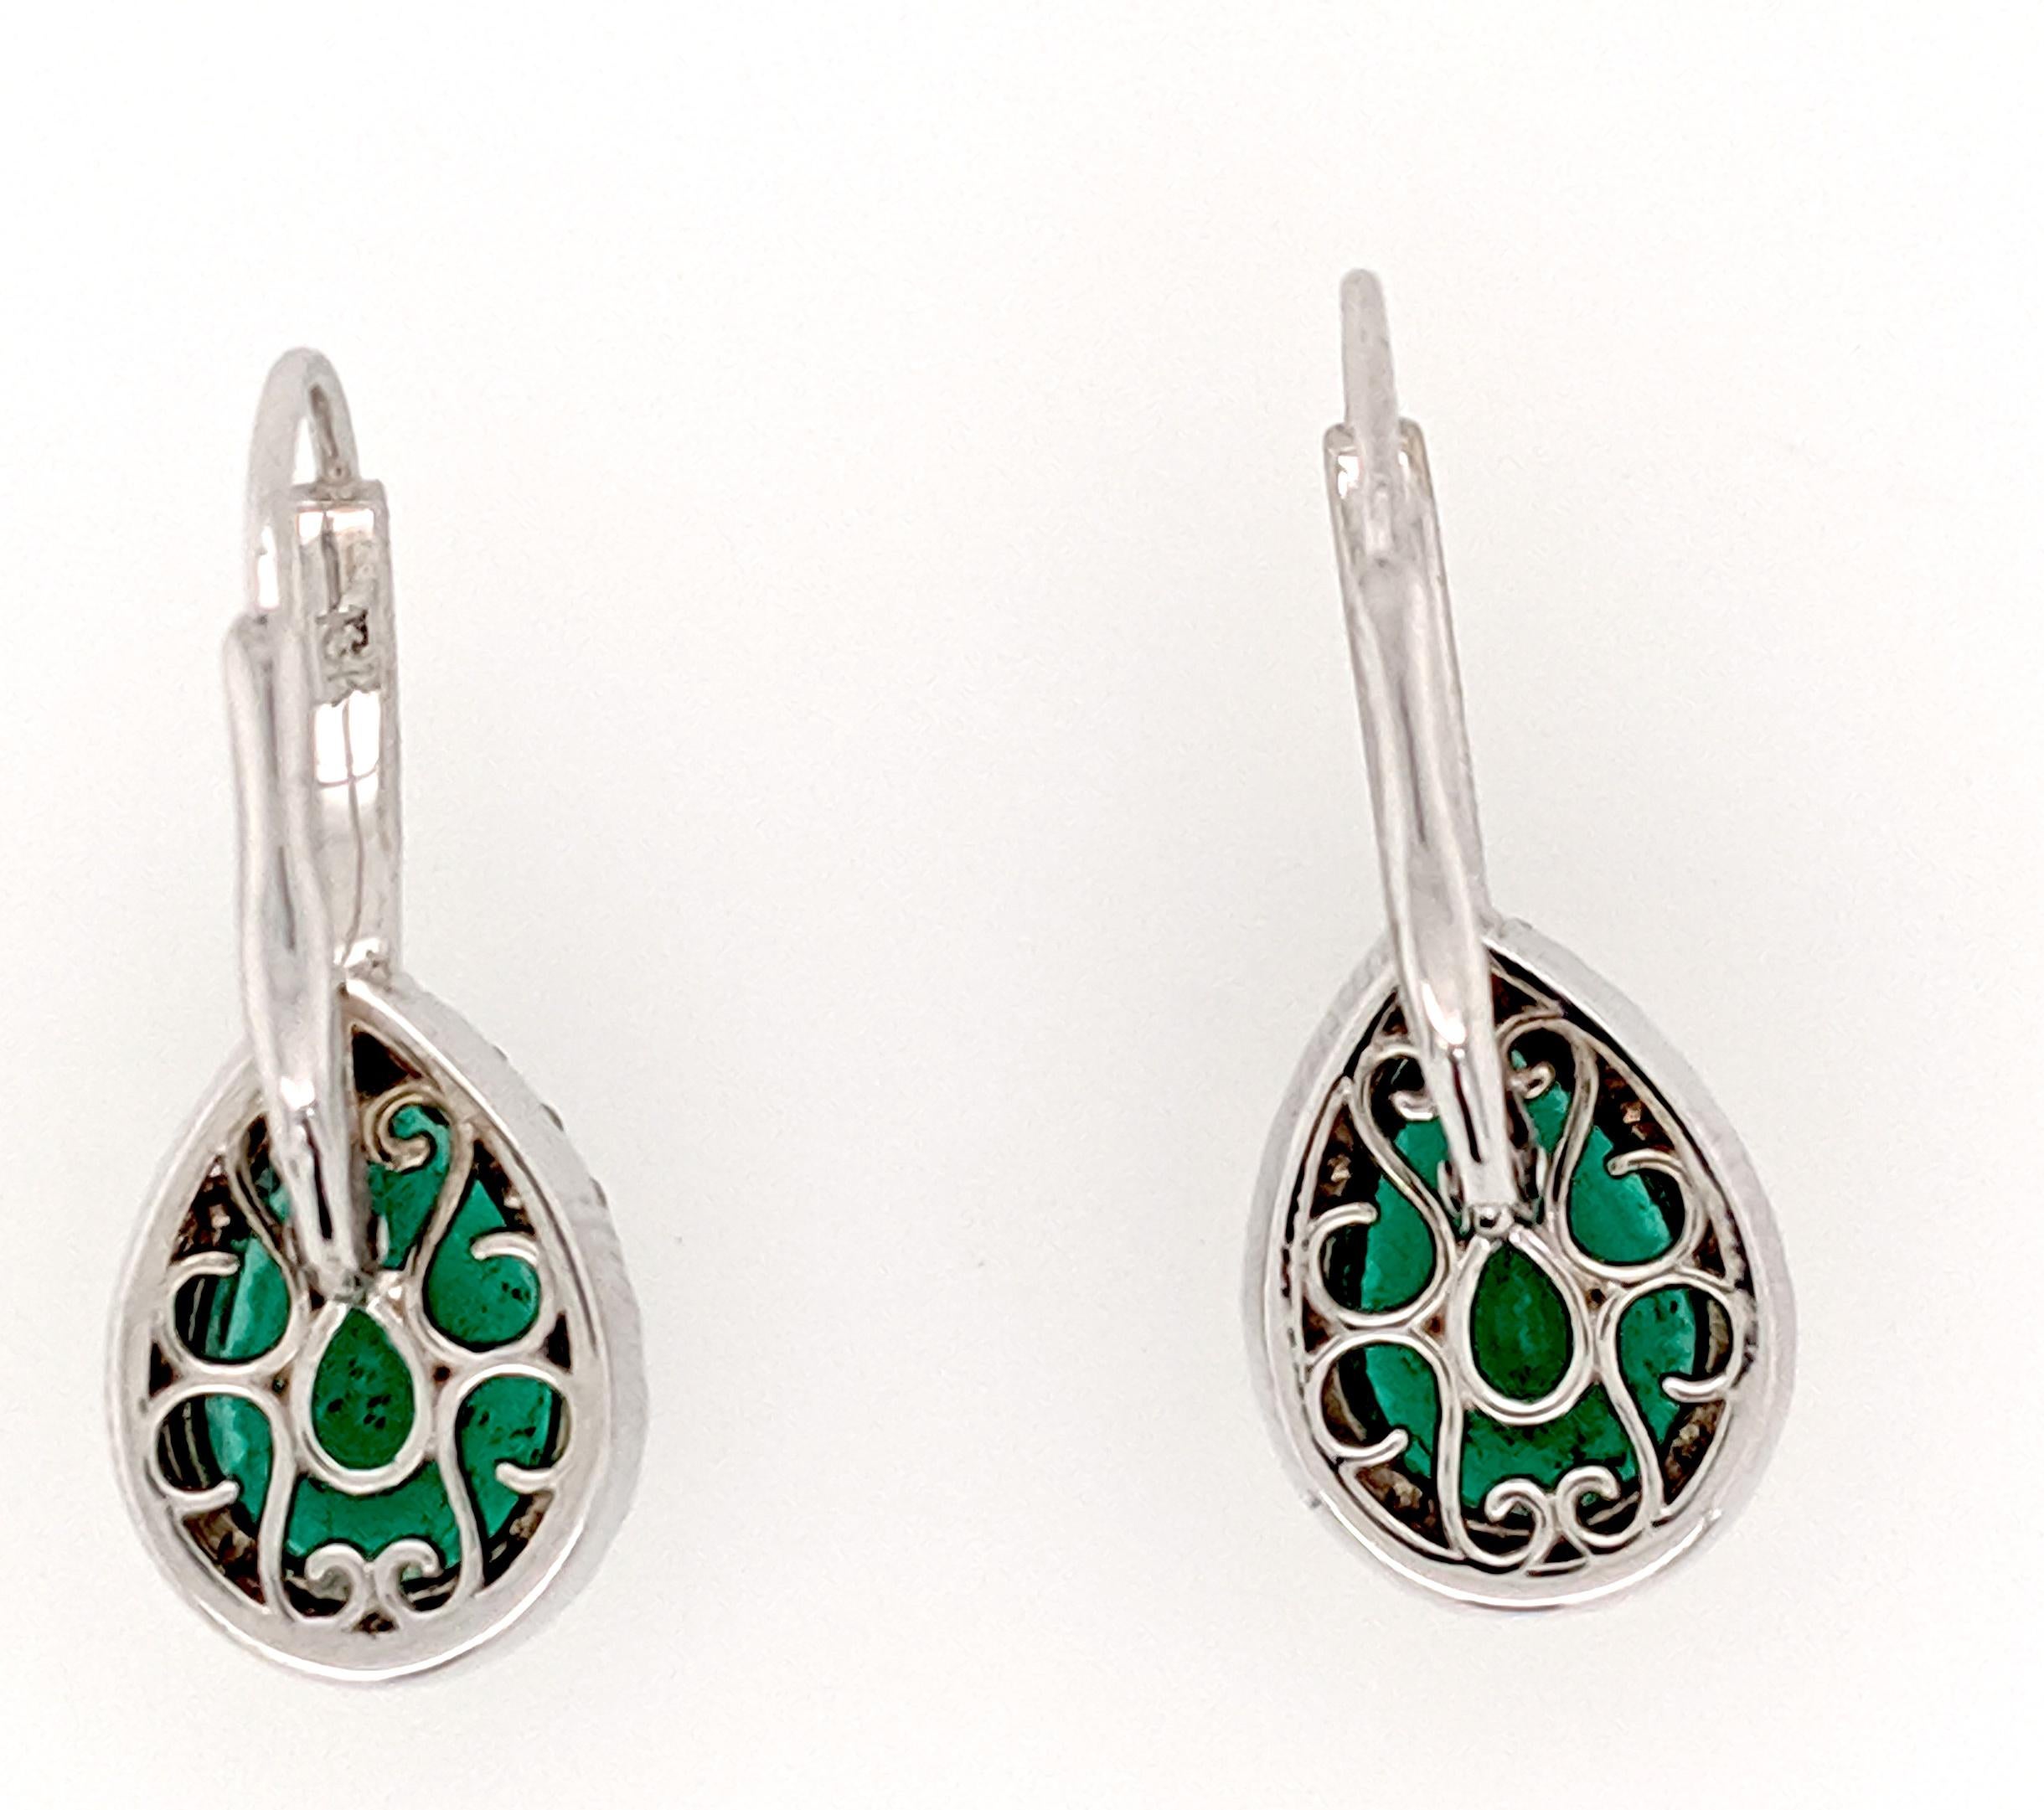 These emerald and diamond earrings are crafted in 18k white gold and feature (2) Pear shaped emeralds that are perfectly matched from the Sandawana mines in Africa and weigh approximately 4.88cttw with Gem color and clarity. There are (54) round